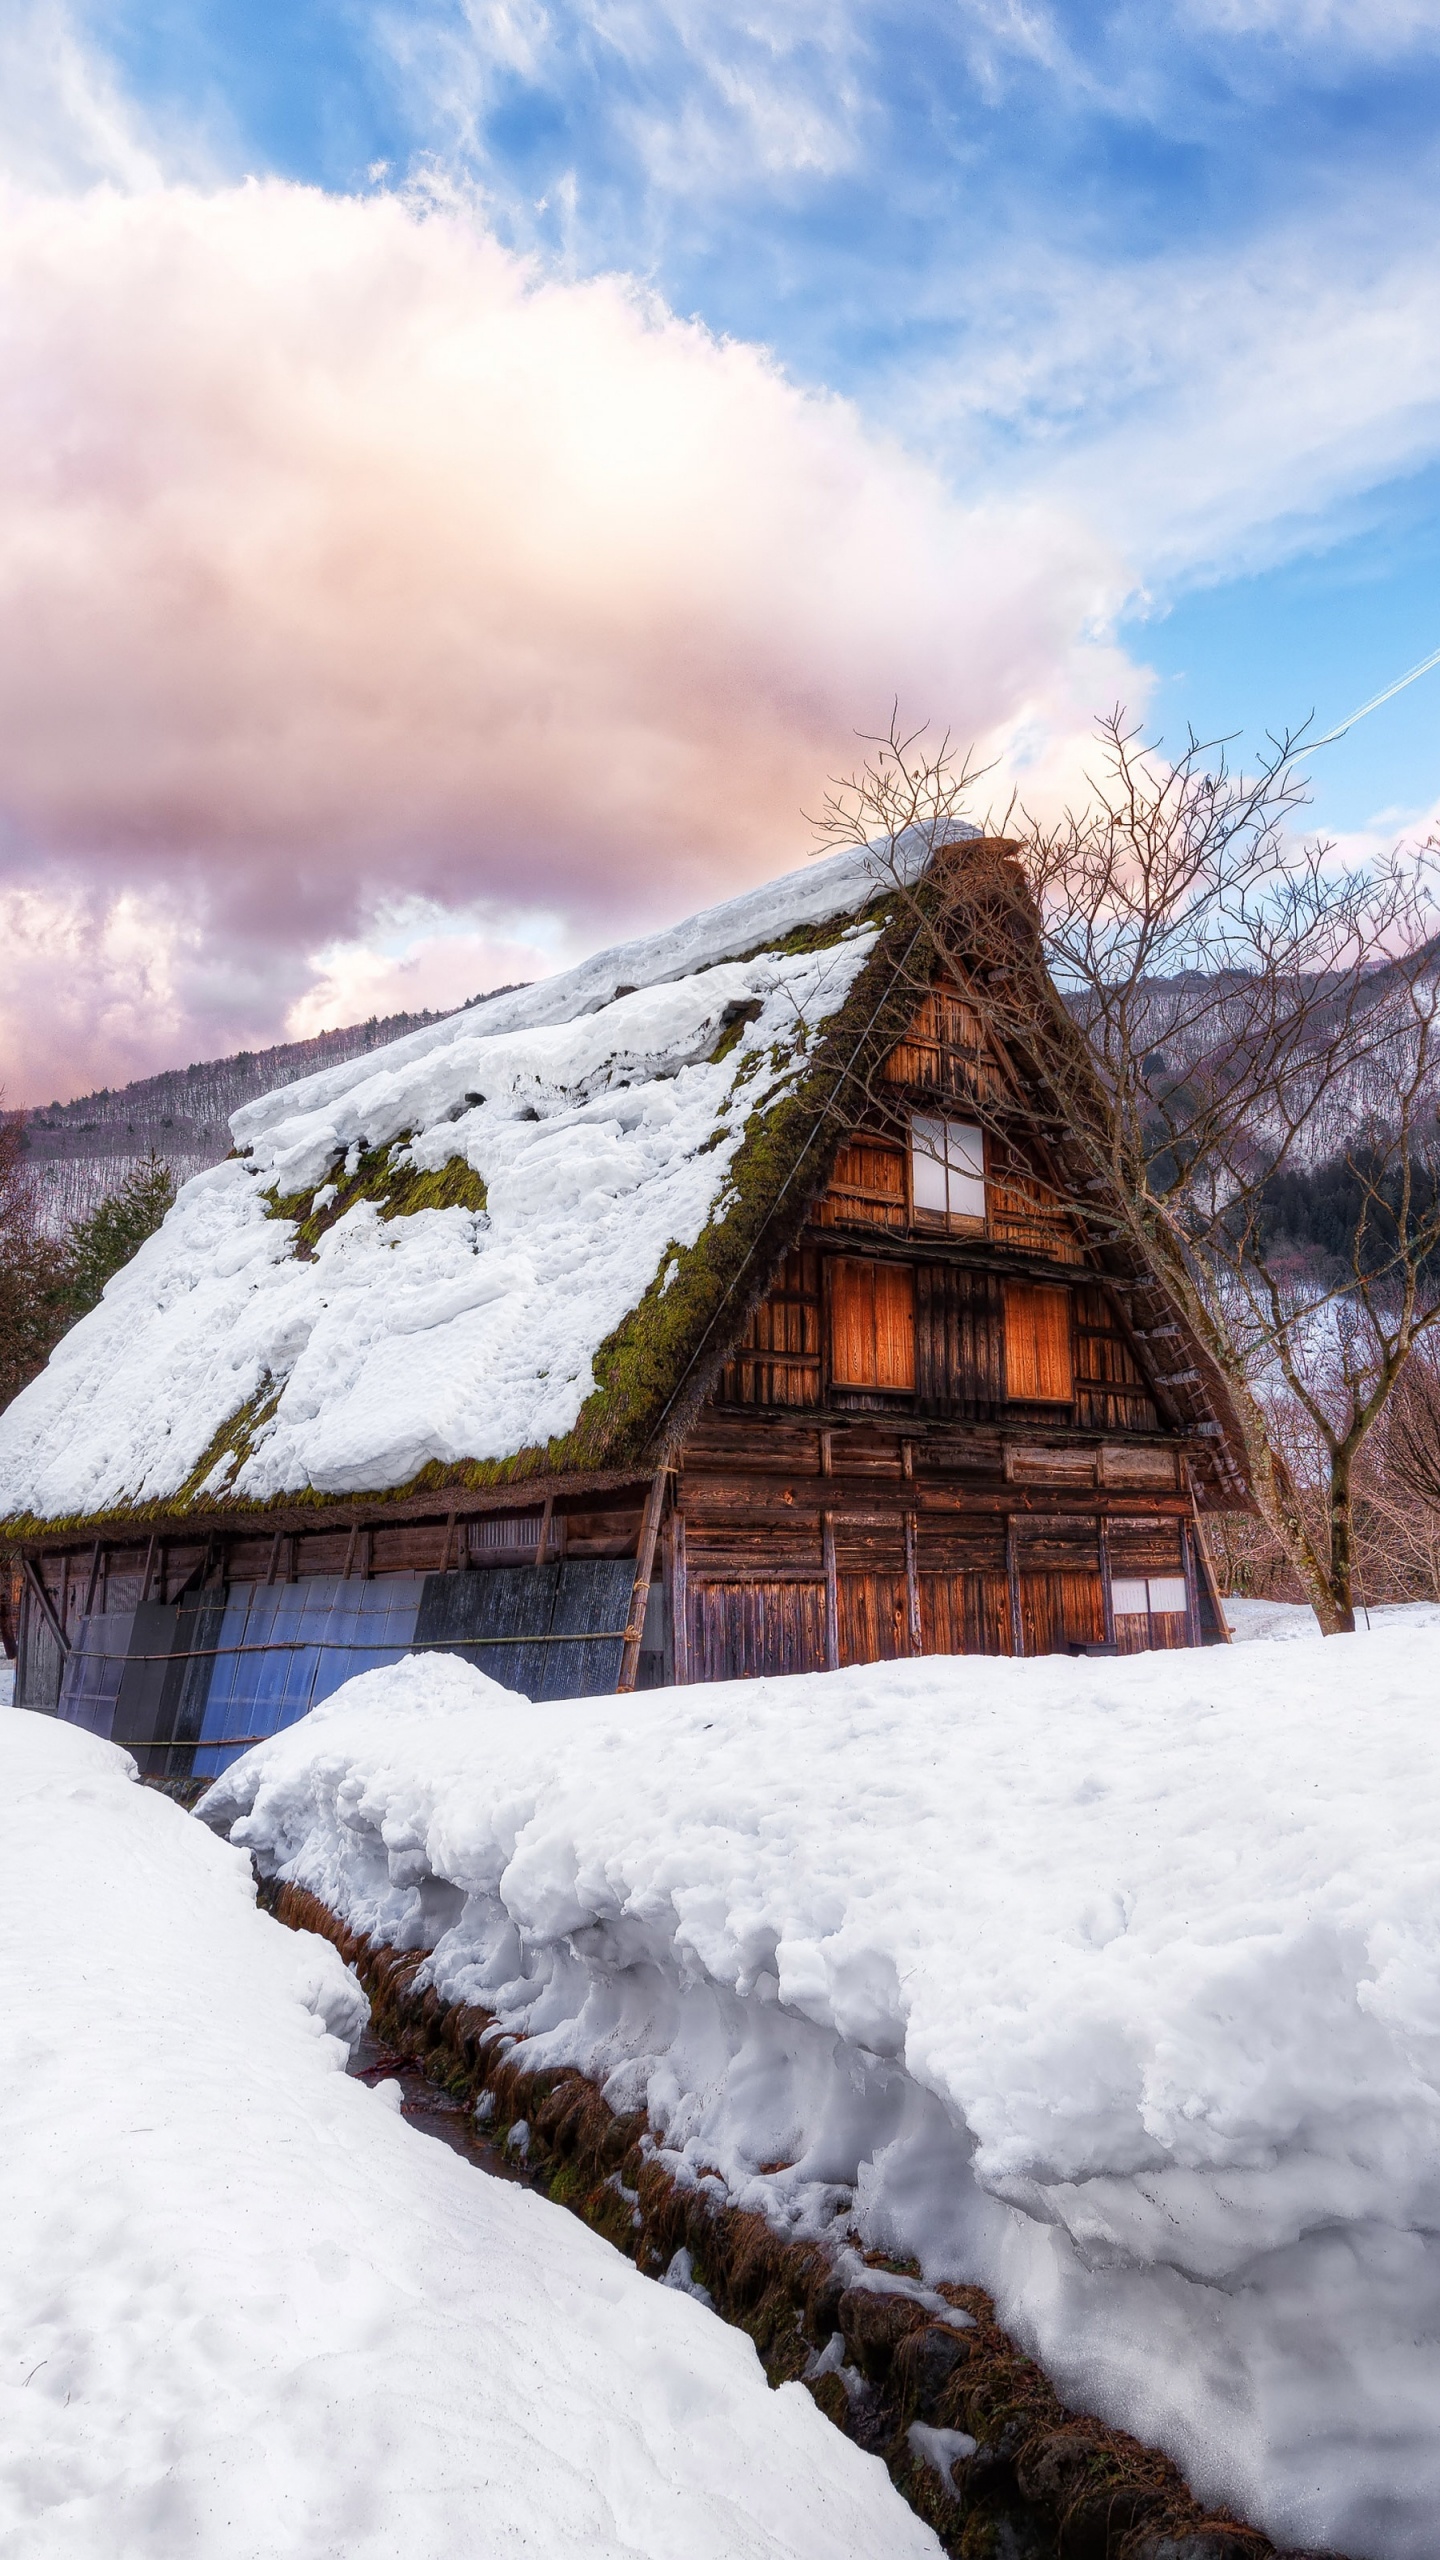 Brown Wooden House on Snow Covered Ground Under White Clouds and Blue Sky During Daytime. Wallpaper in 1440x2560 Resolution